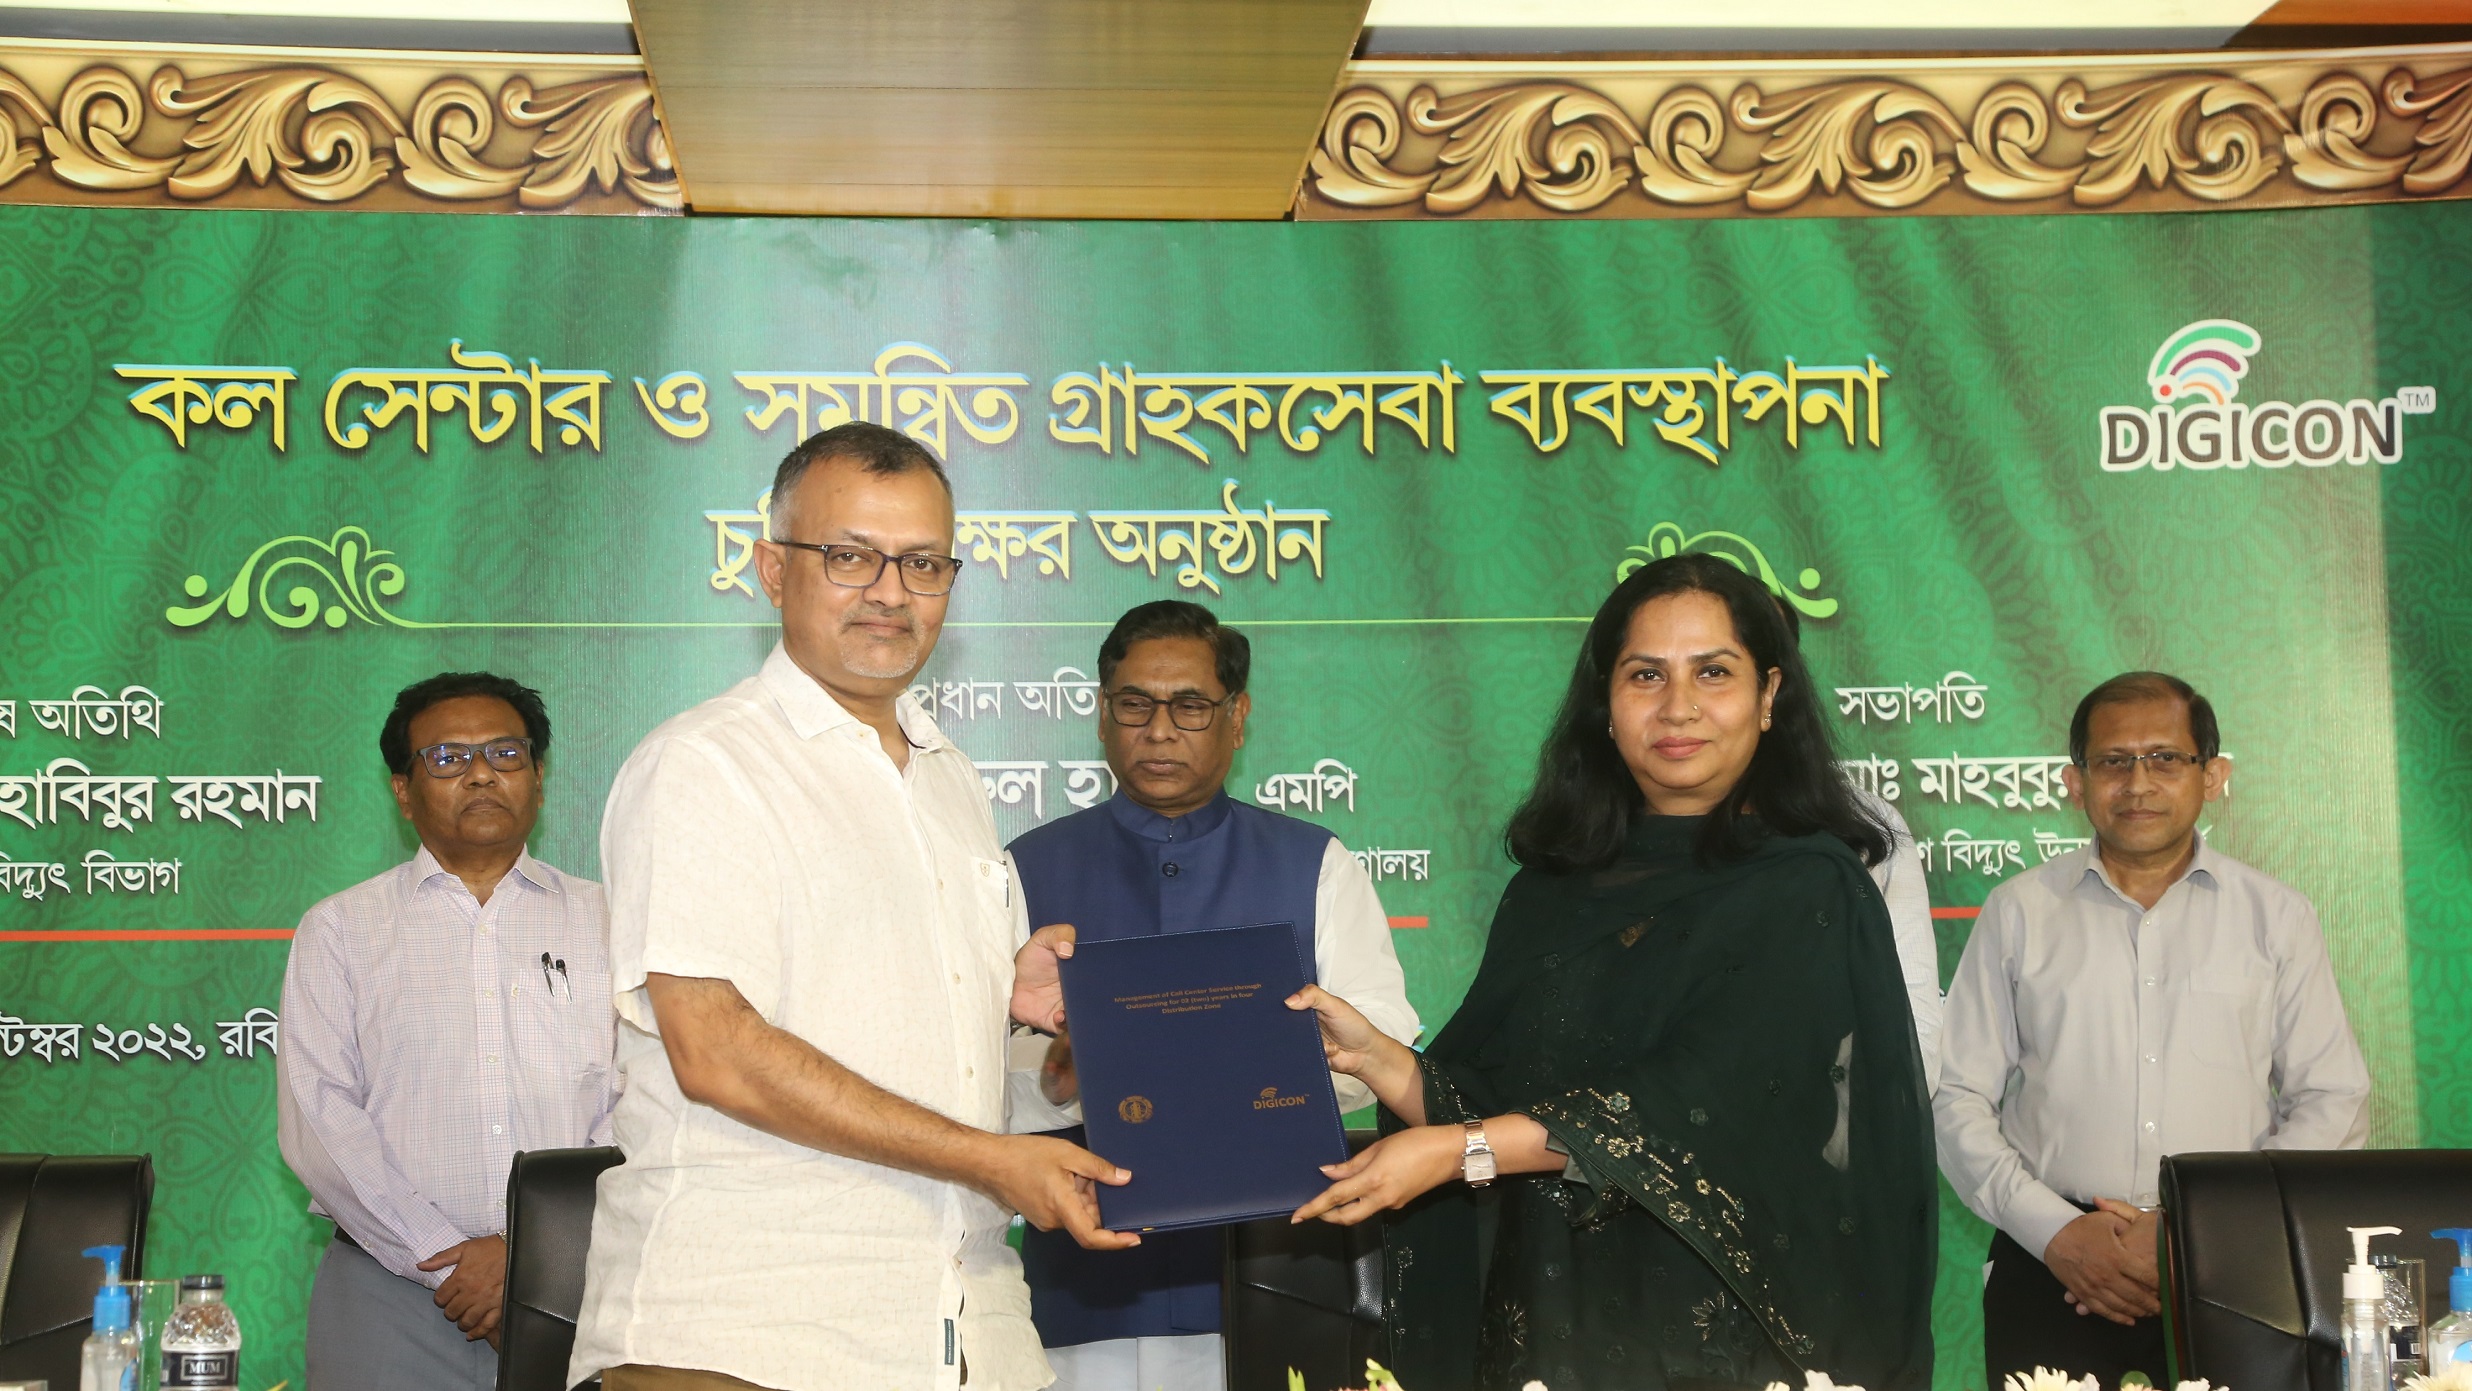 Digicon Technologies Limited recently joined hands with Bangladesh Power Development Board (BPDB)